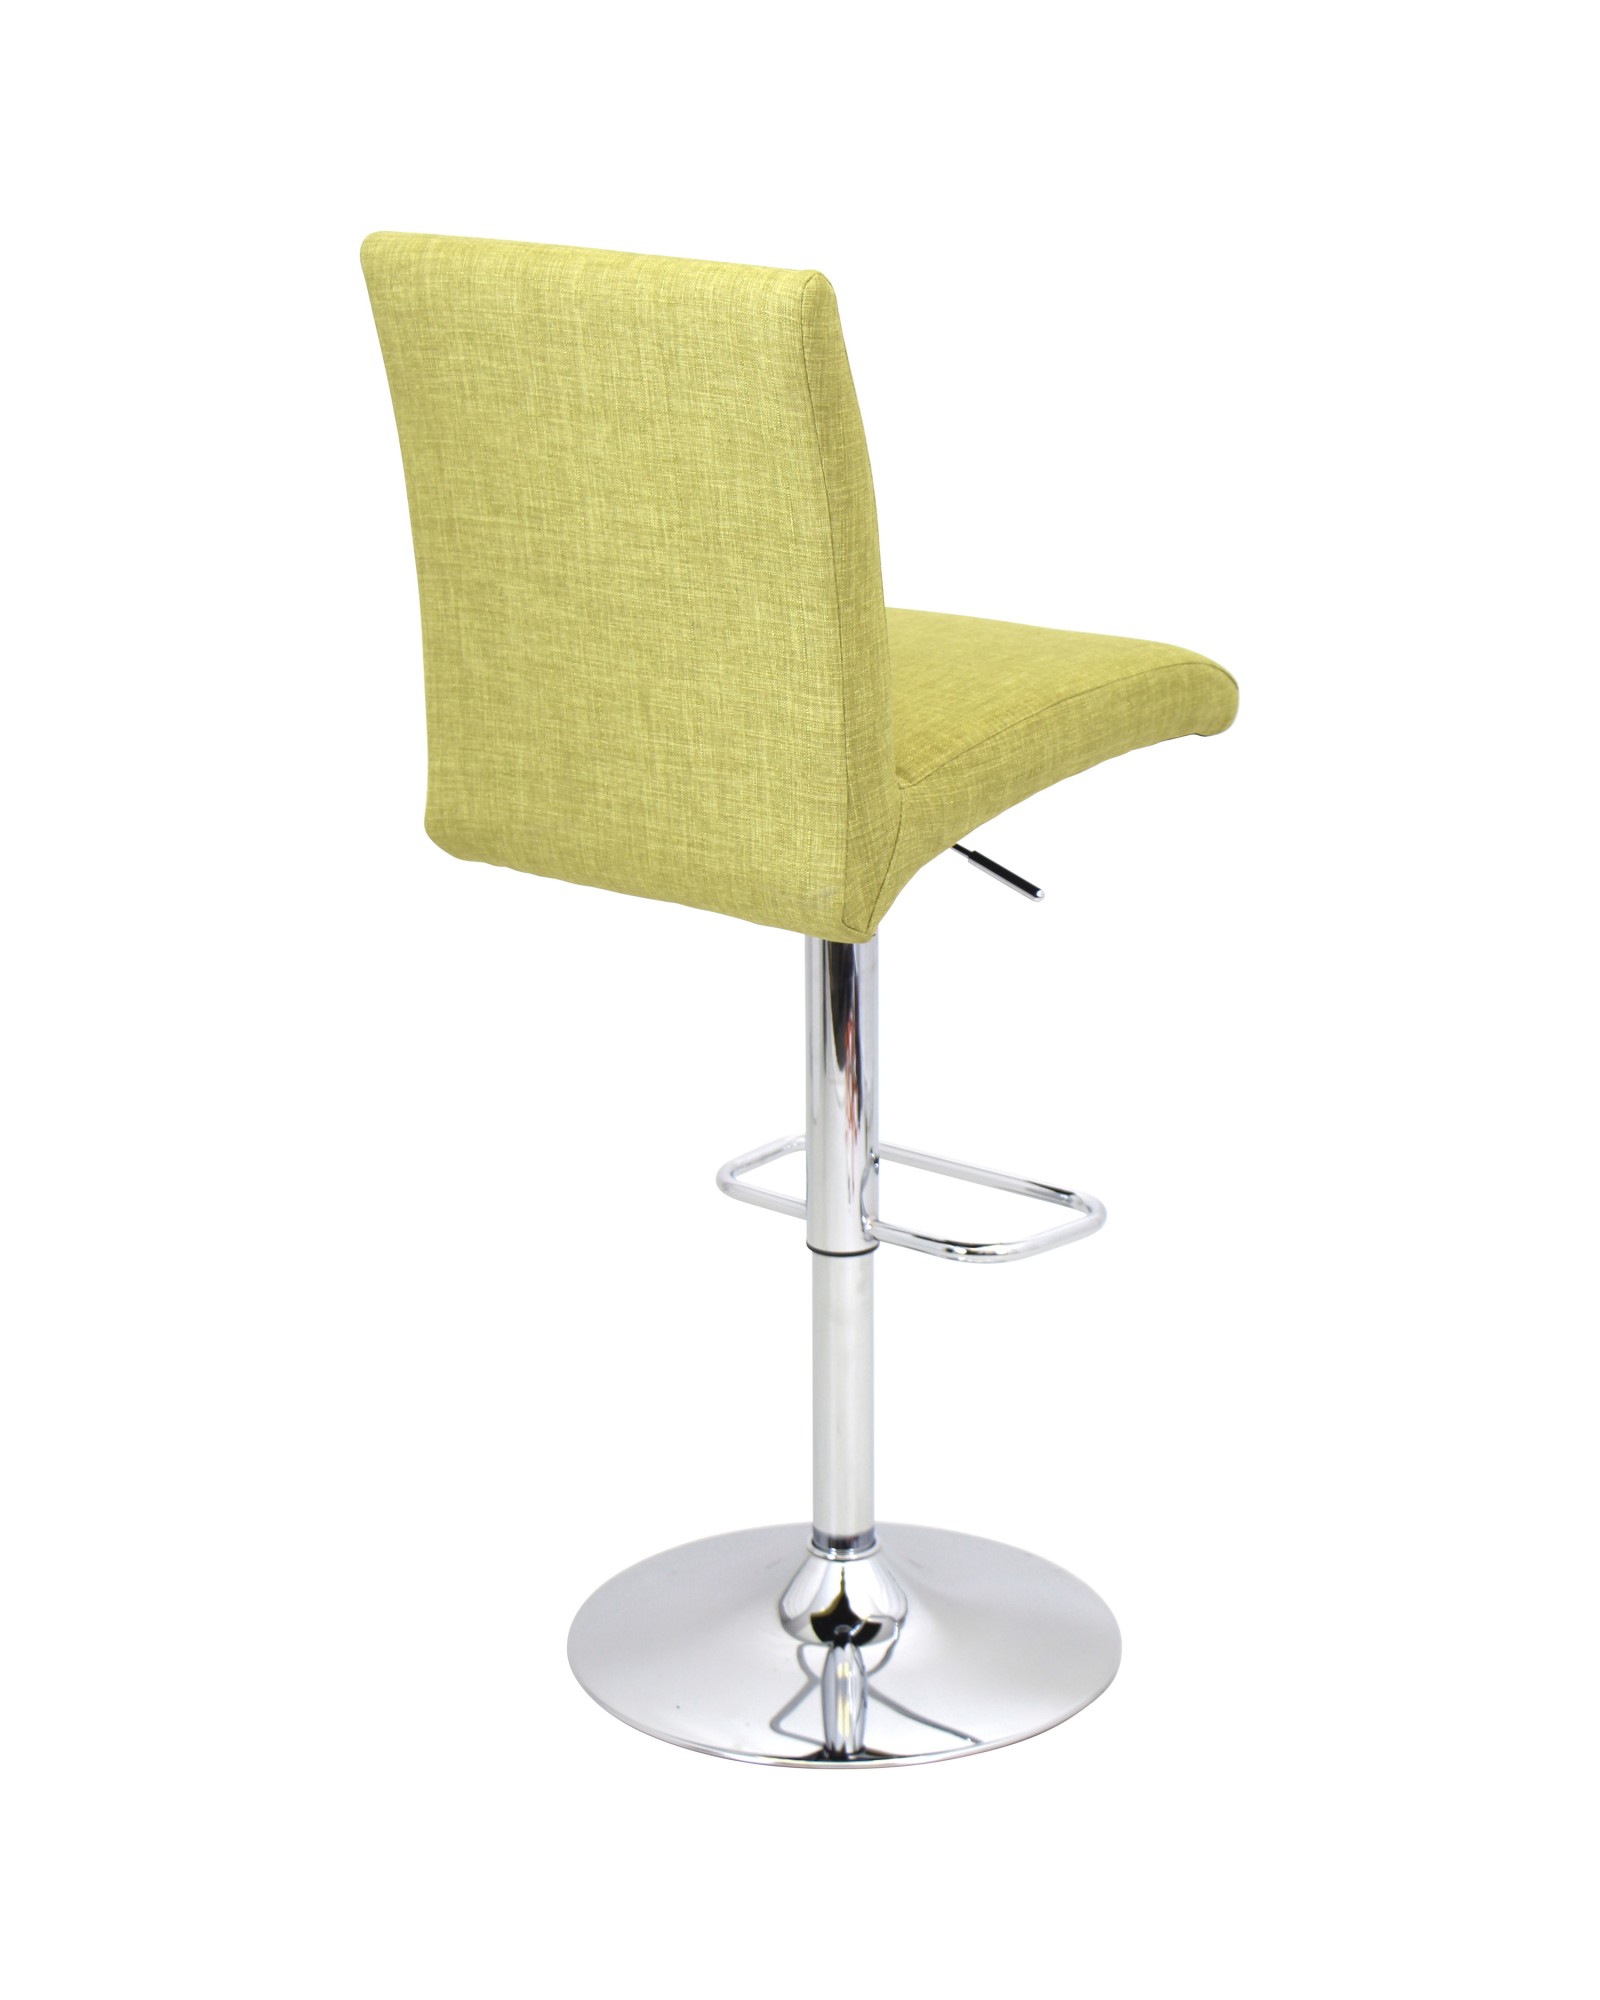 Tintori Contemporary Adjustable Barstool with Swivel in Green